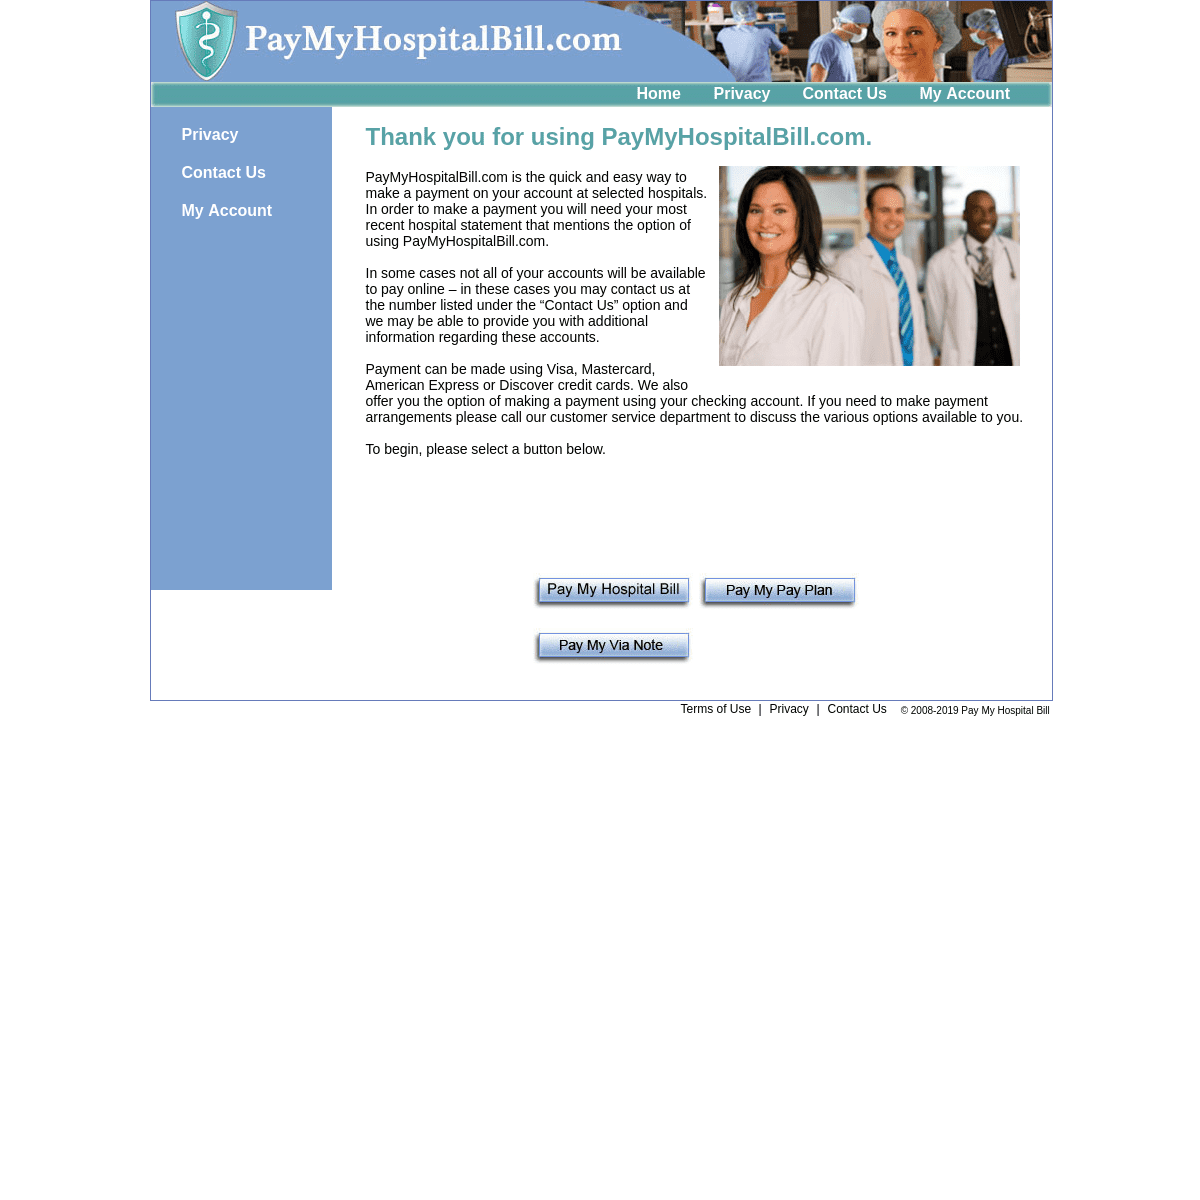 A complete backup of paymyhospitalbill.com